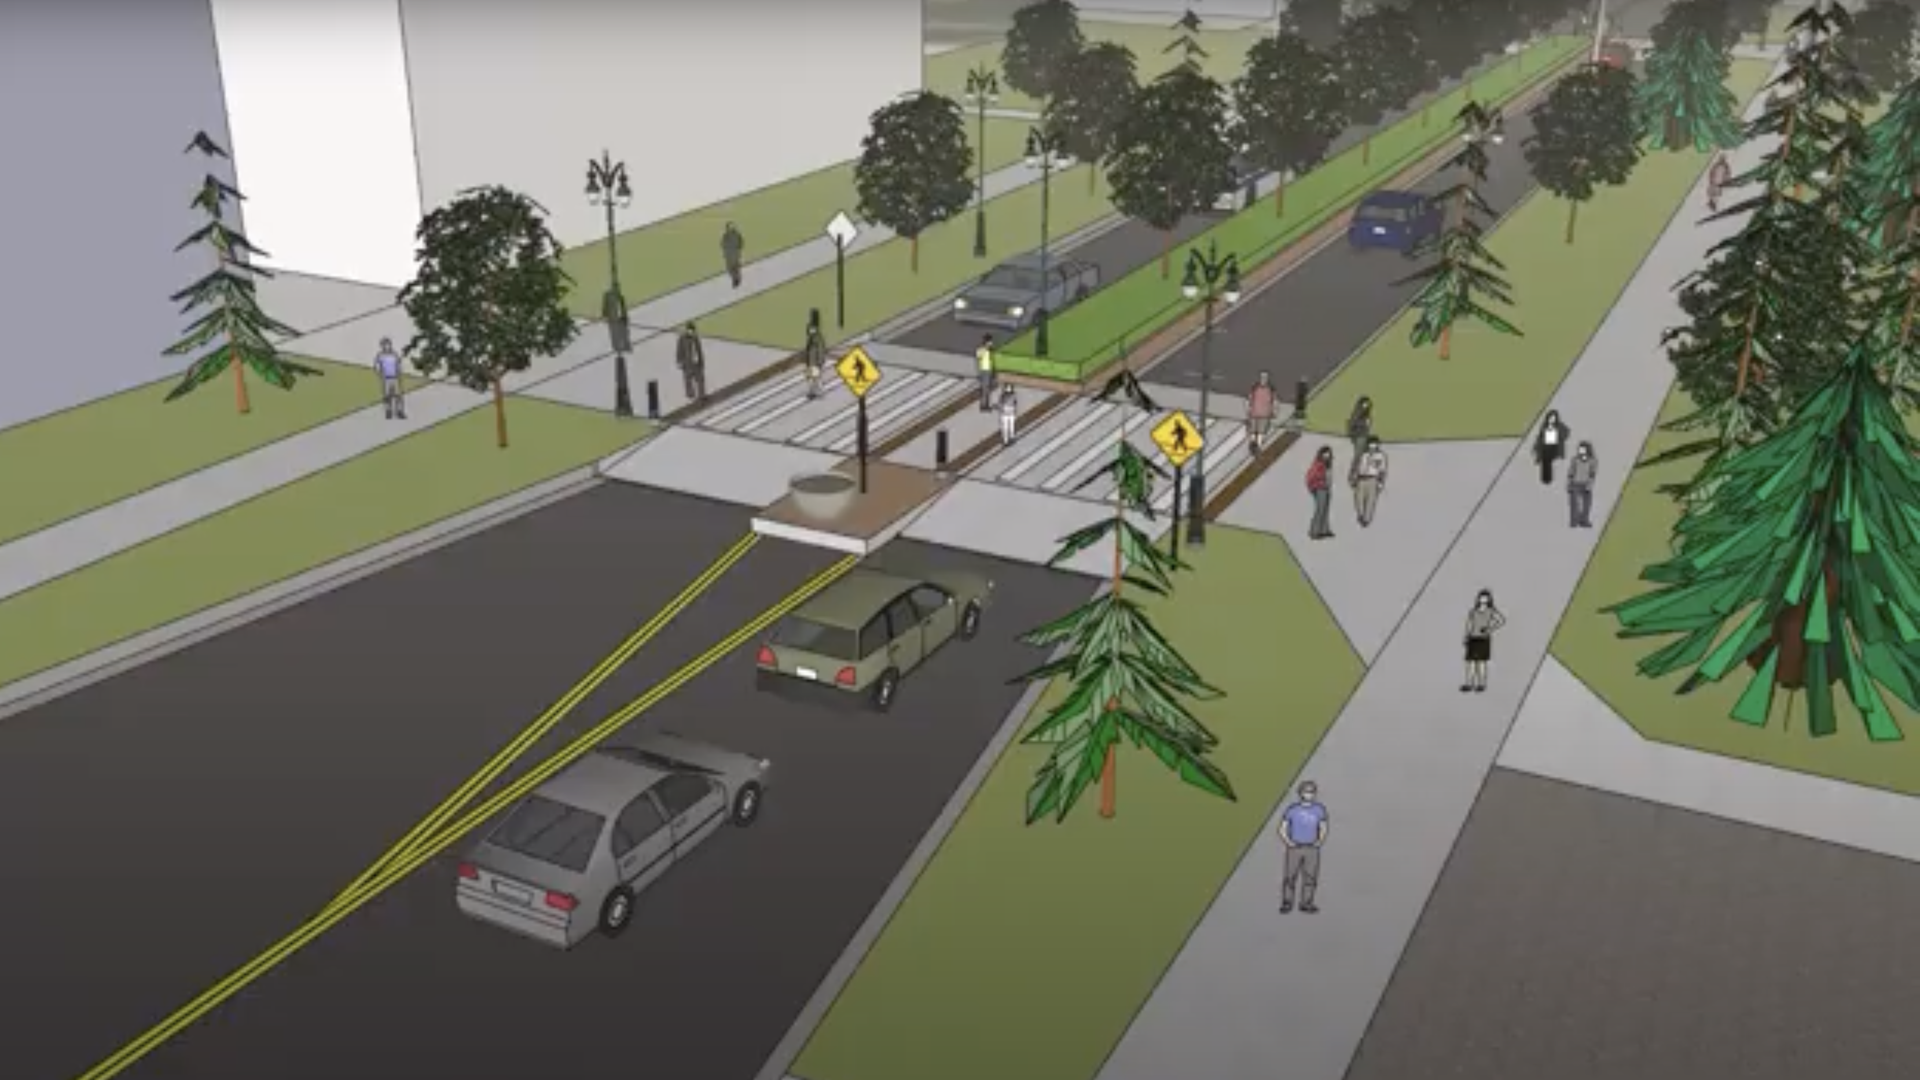 A construction rendering of a street with green trees, cars, and a raised pedestrian crosswalk in the center.